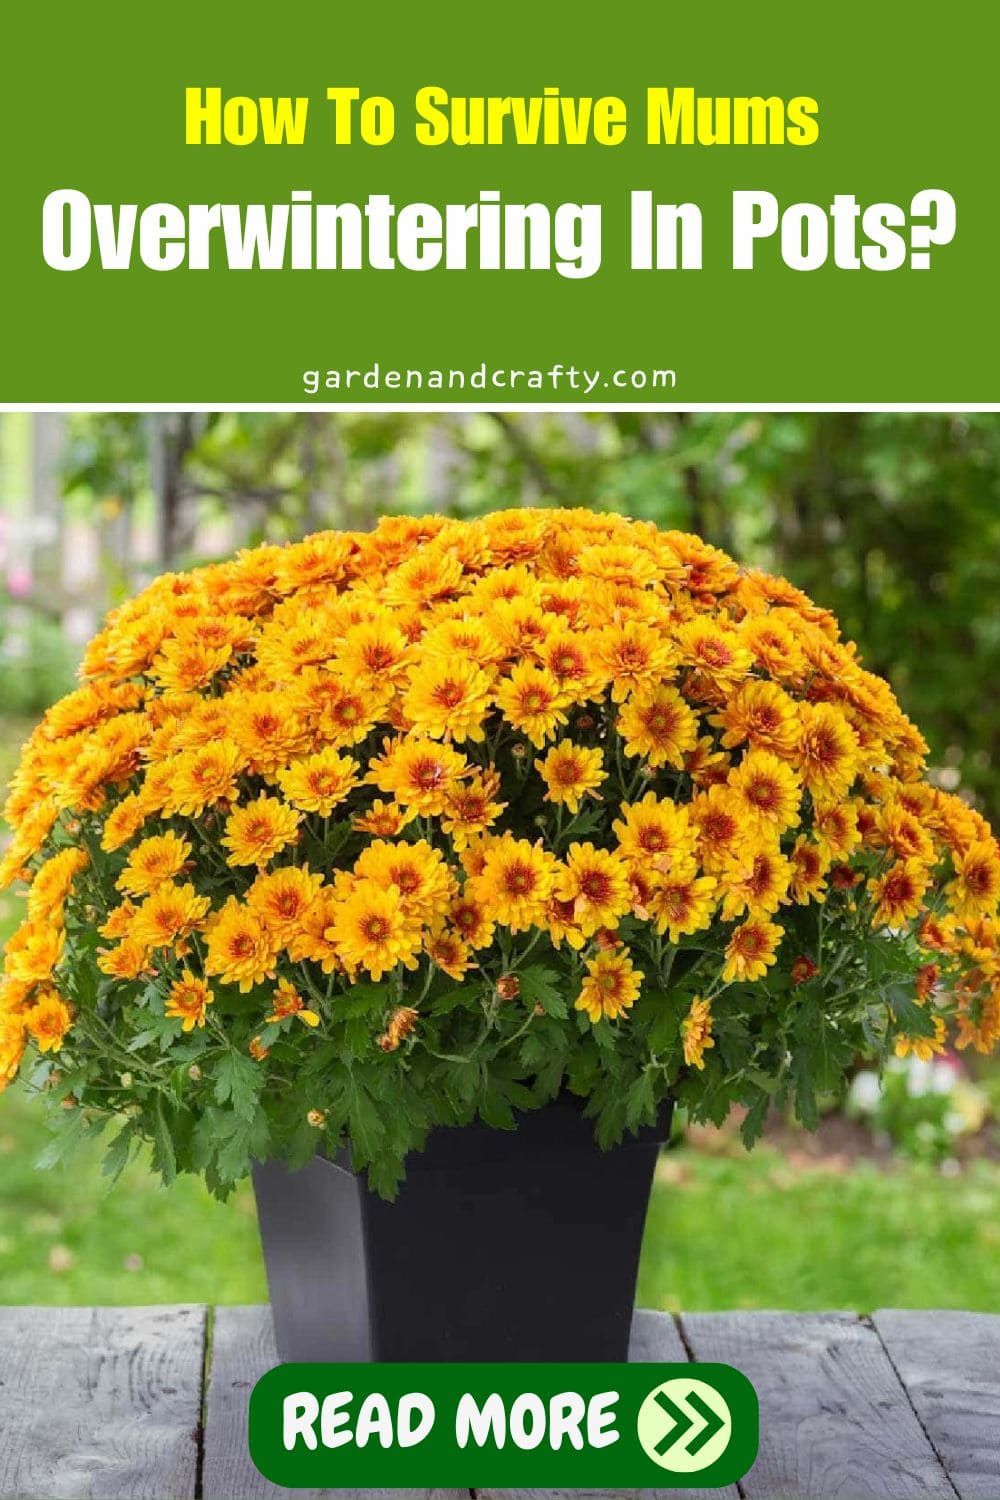 How To Survive Mums Overwintering In Pots